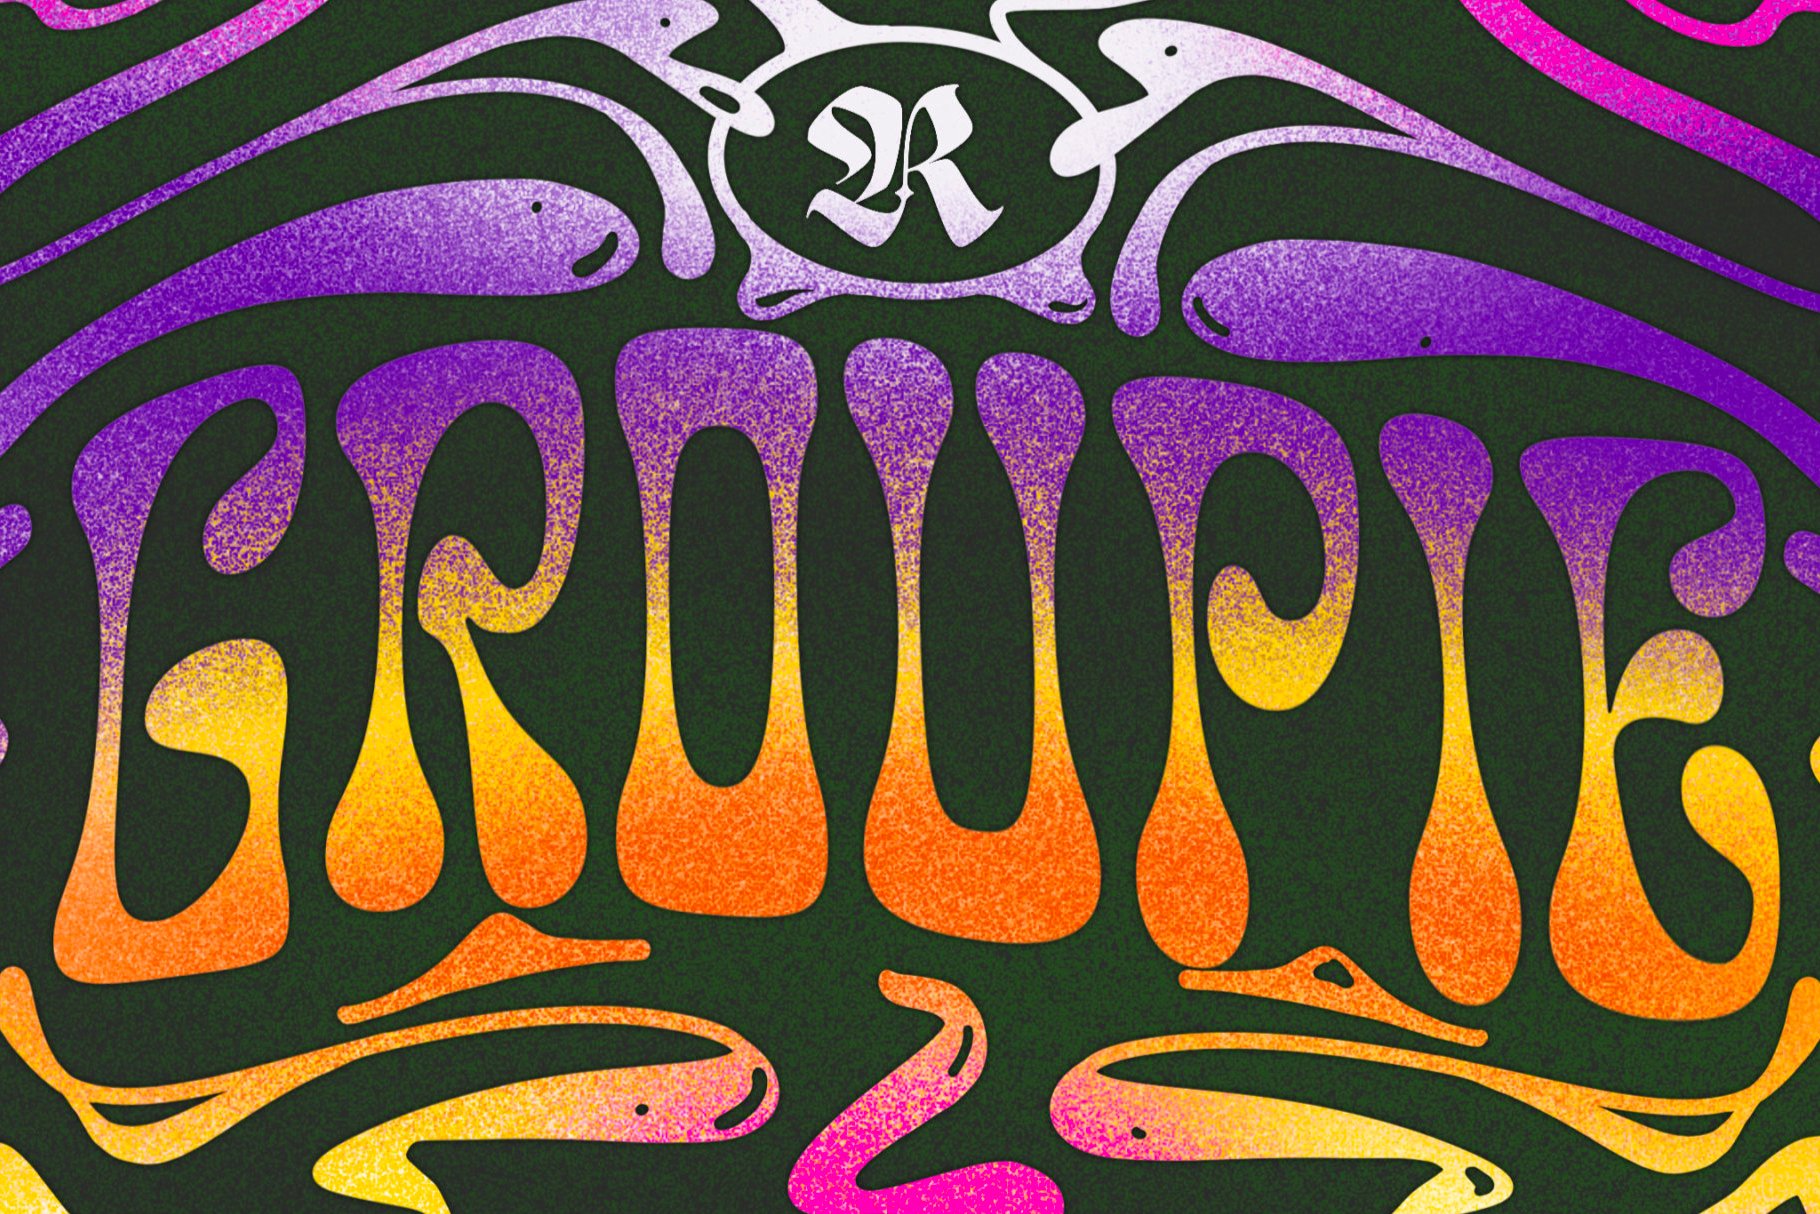 Groupie 2 Fonts cover image.